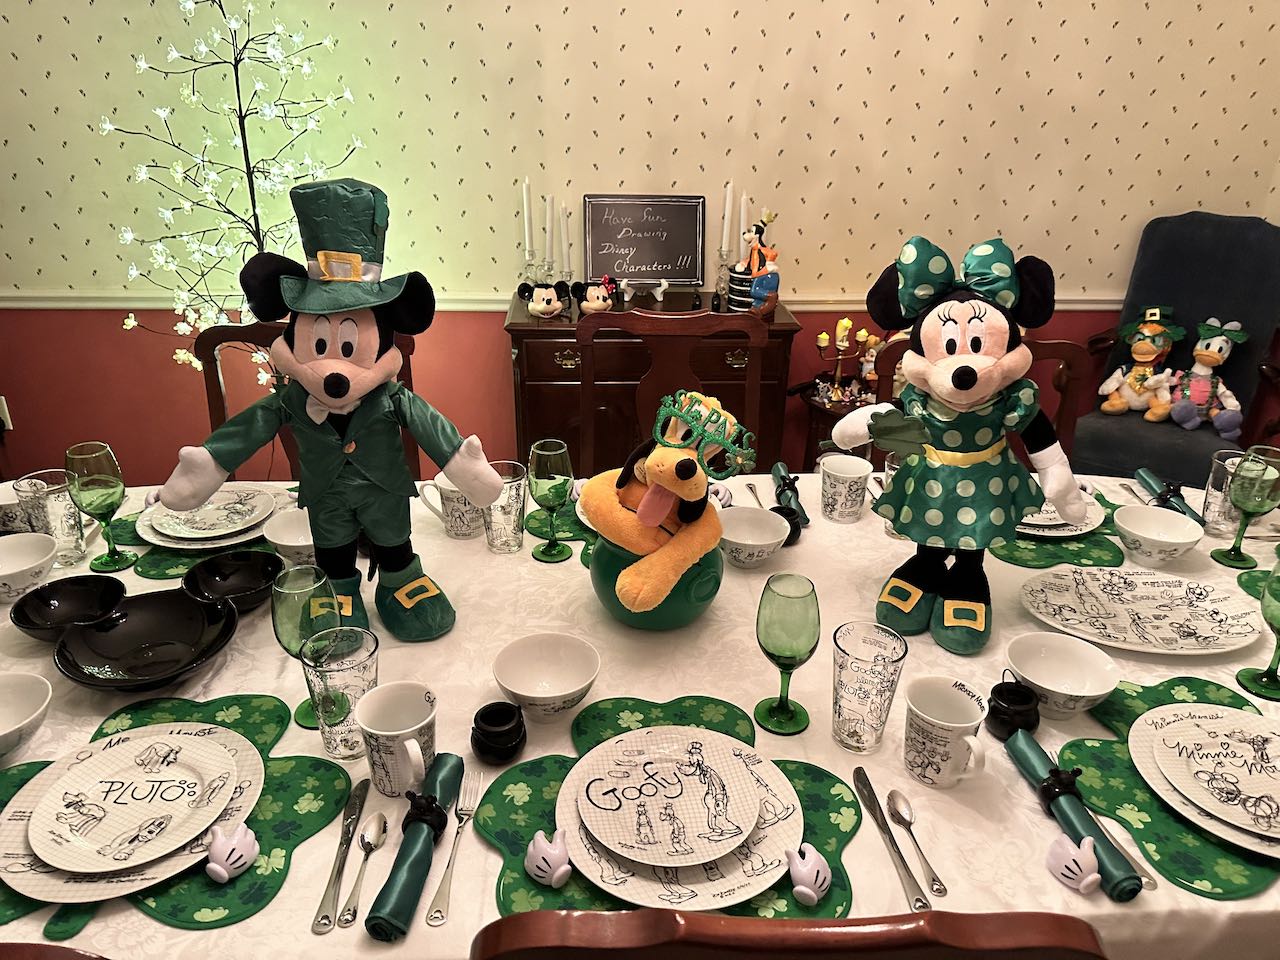 Mickey and Minnie “Get Their Green On” for a St. Patrick's Day